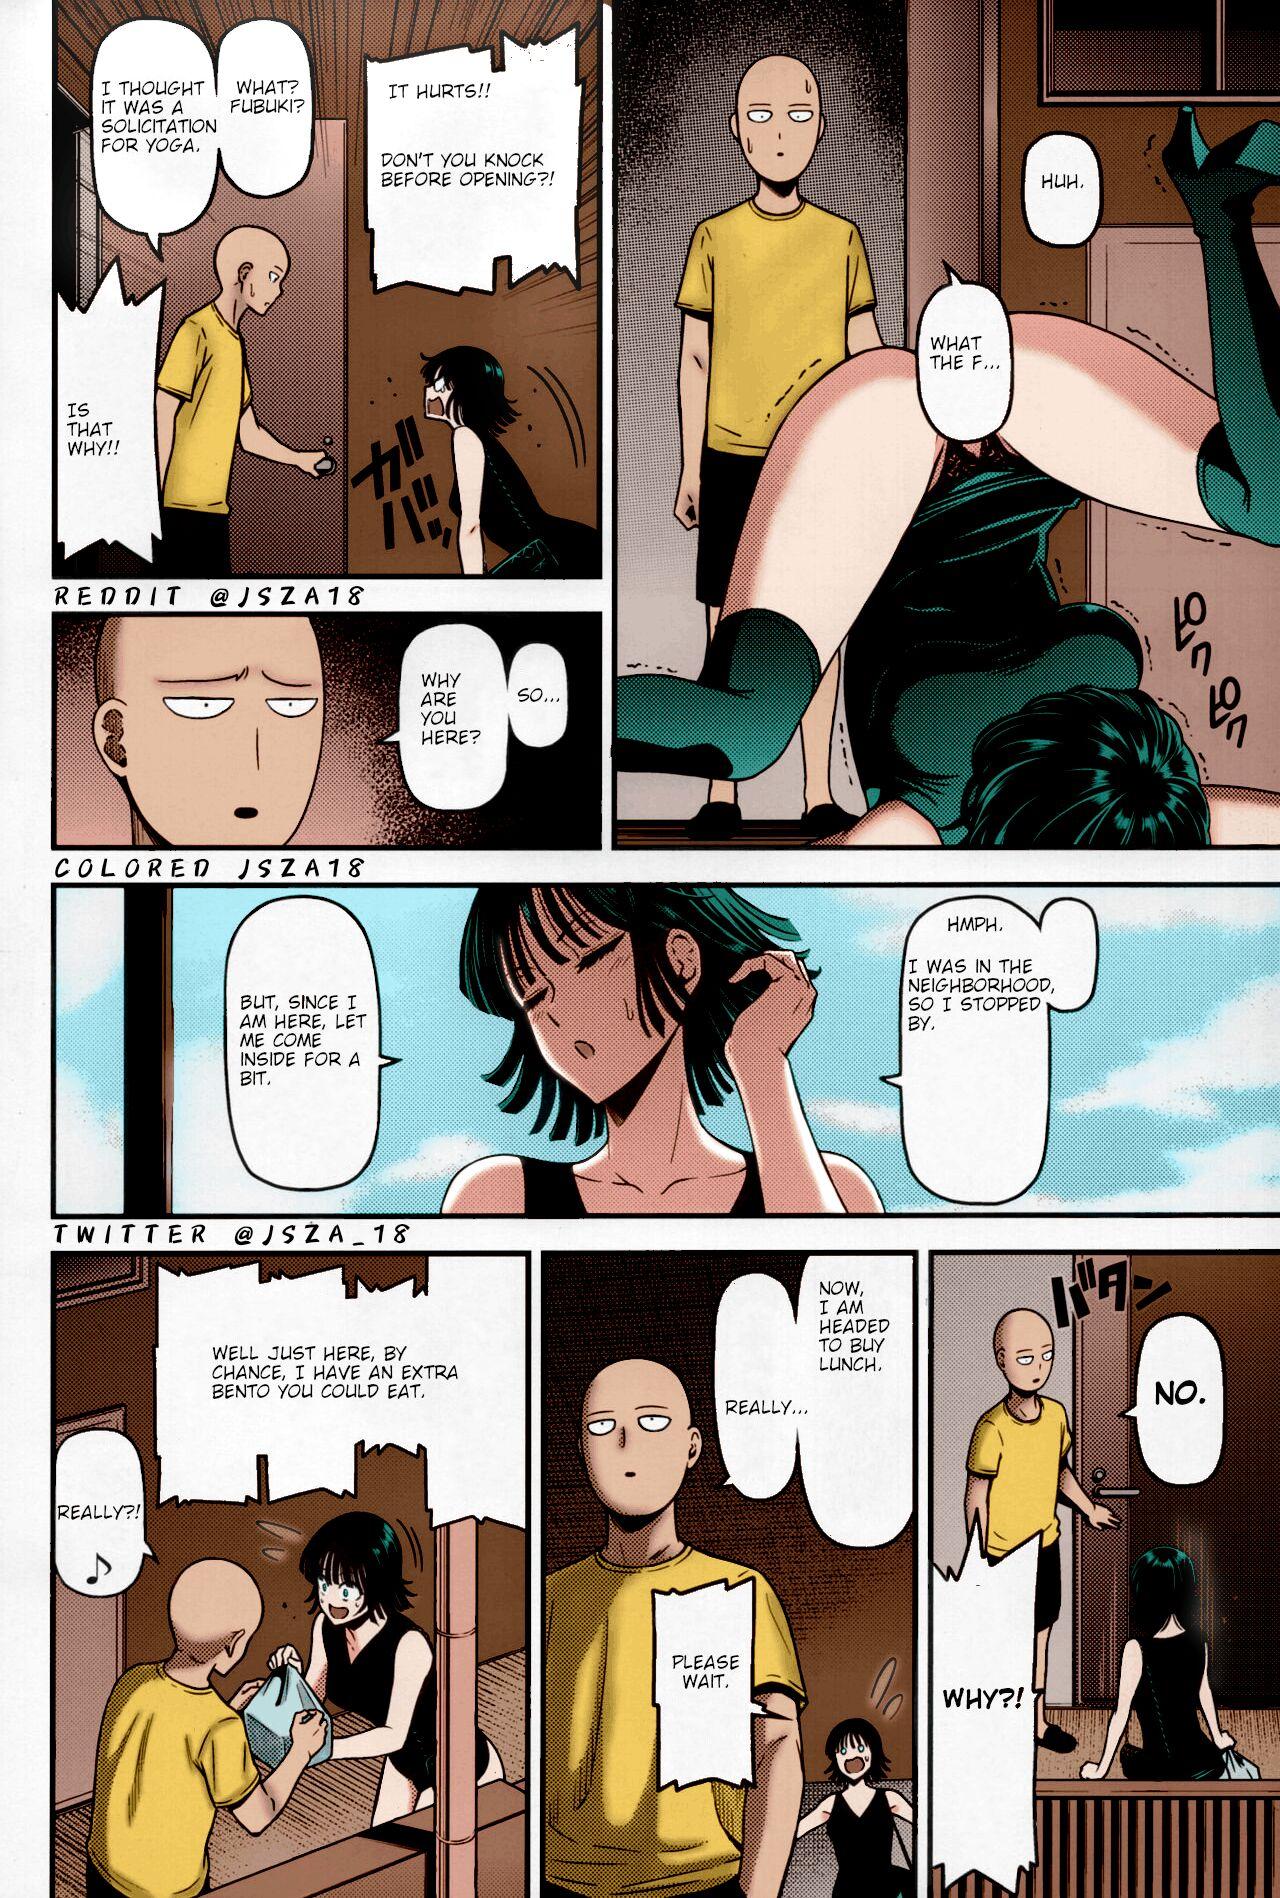 Gorgeous ONE-HURRICANE 6 - One punch man Sensual - Page 3